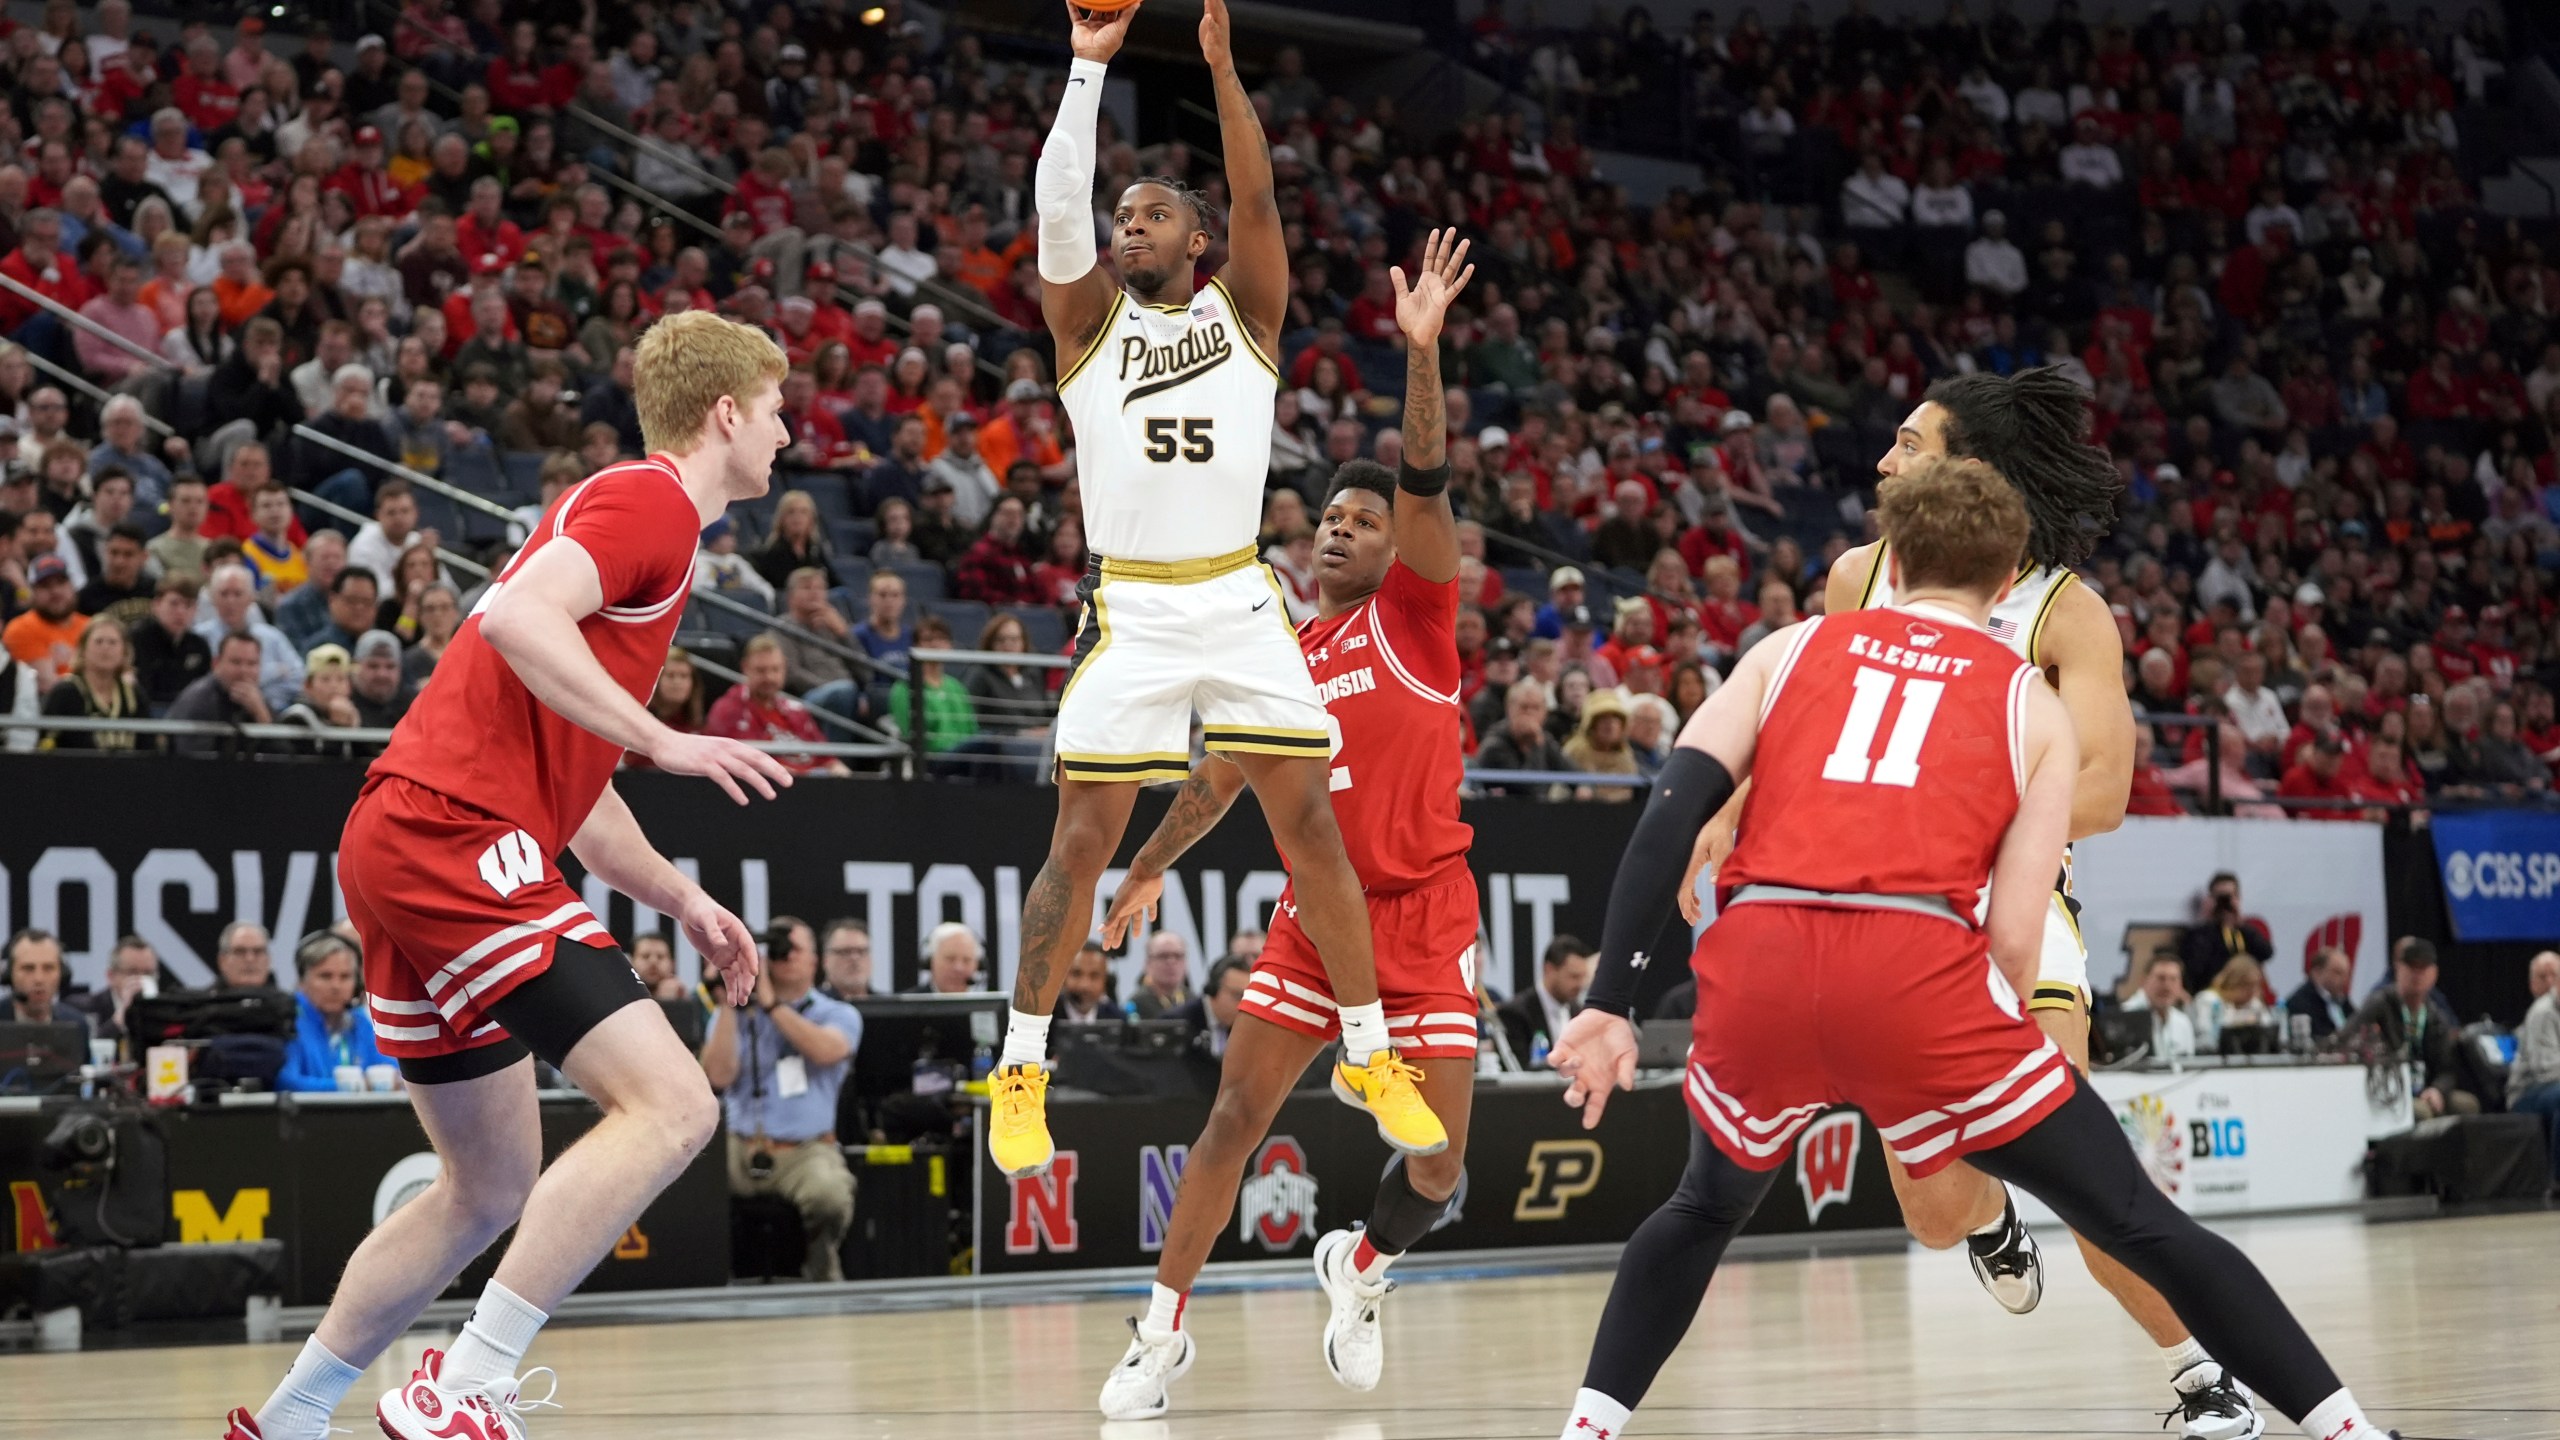 Purdue guard Lance Jones (55) shoots during the first half of an NCAA college basketball game against Wisconsin in the semifinal round of the Big Ten Conference tournament, Saturday, March 16, 2024, in Minneapolis. (AP Photo/Abbie Parr)